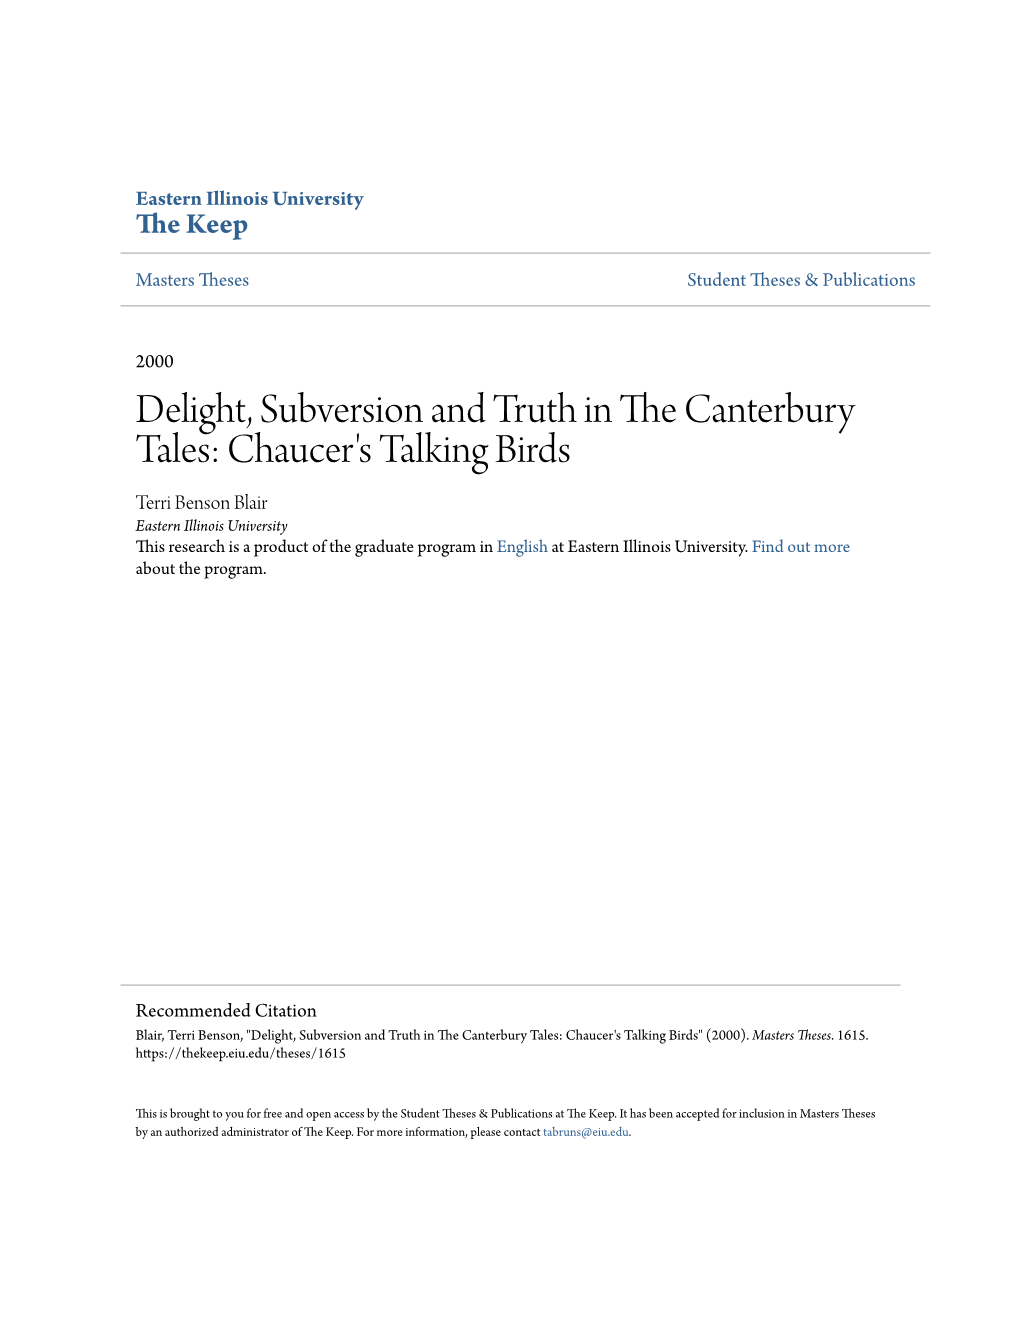 Delight, Subversion and Truth in the Canterbury Tales: Chaucer's Talking Birds